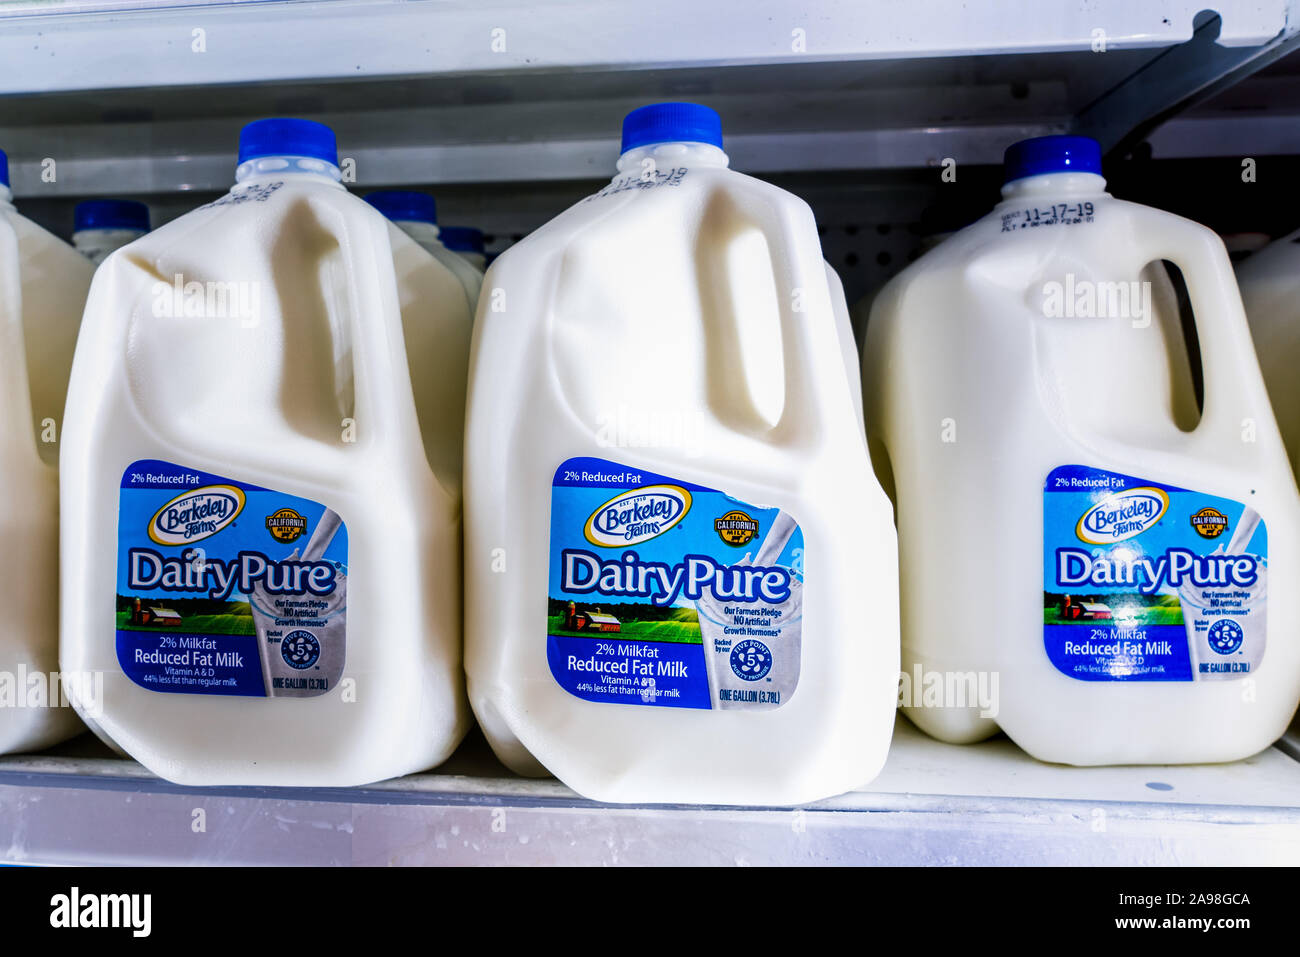 https://c8.alamy.com/comp/2A98GCA/nov-12-2019-sunnyvale-ca-usa-dairypure-milk-on-shelves-in-a-supermarket-the-dairypure-brand-is-owned-by-the-largest-dairy-company-in-the-unite-2A98GCA.jpg